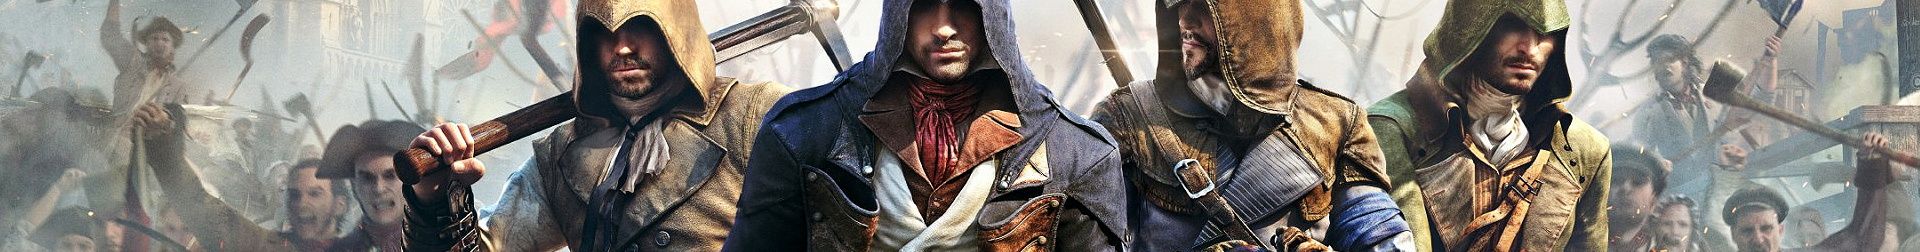 Assassins Creed: Unity Banner